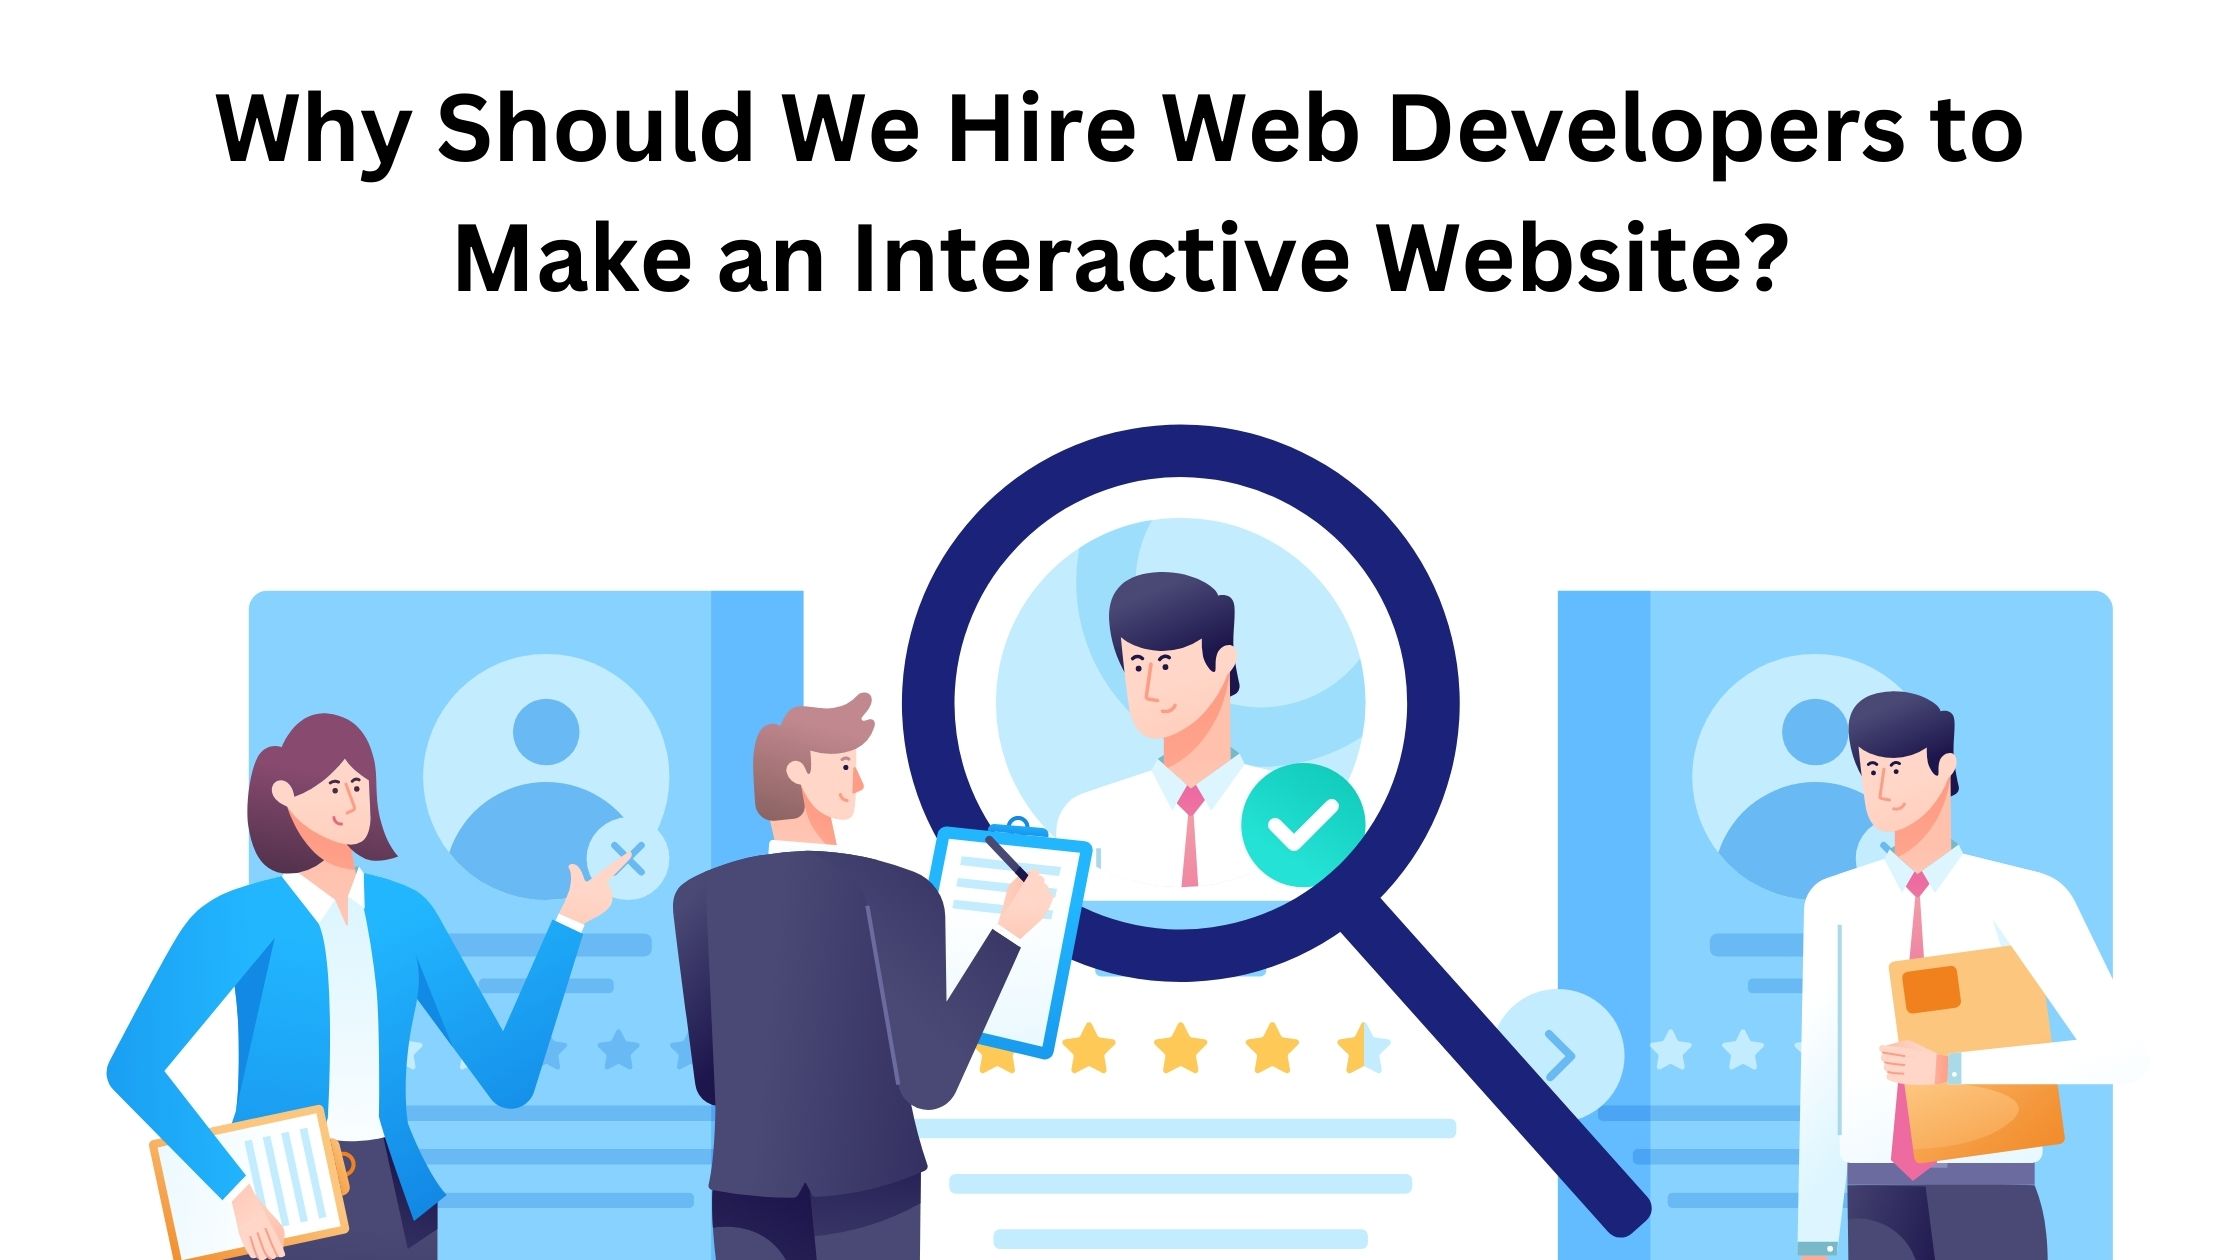 Why Should We Hire Web Developers to make an Interactive Website?